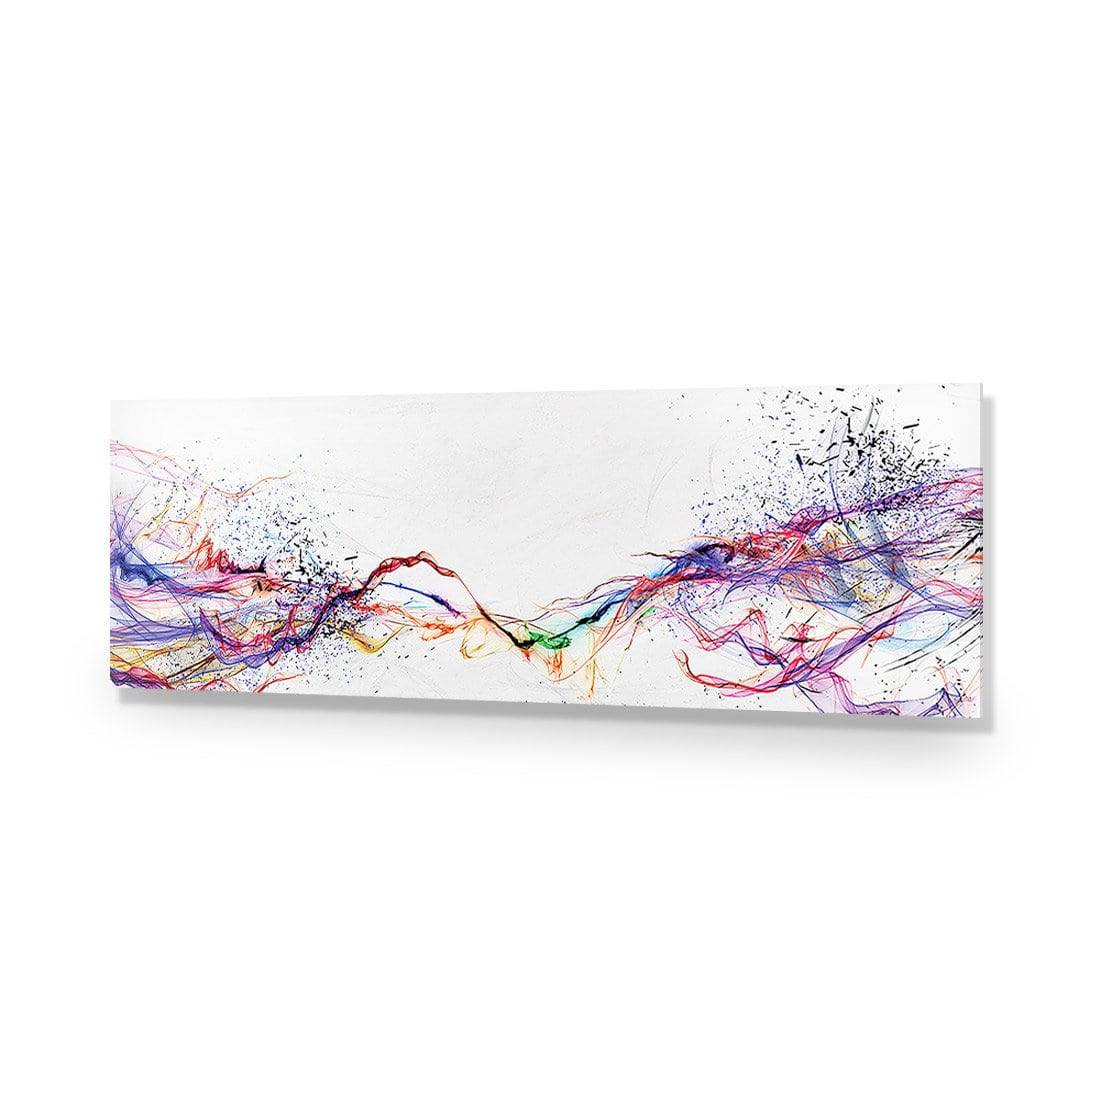 Electricity On Black, Inverted, Long-Acrylic-Wall Art Design-Without Border-Acrylic - No Frame-60x20cm-Wall Art Designs